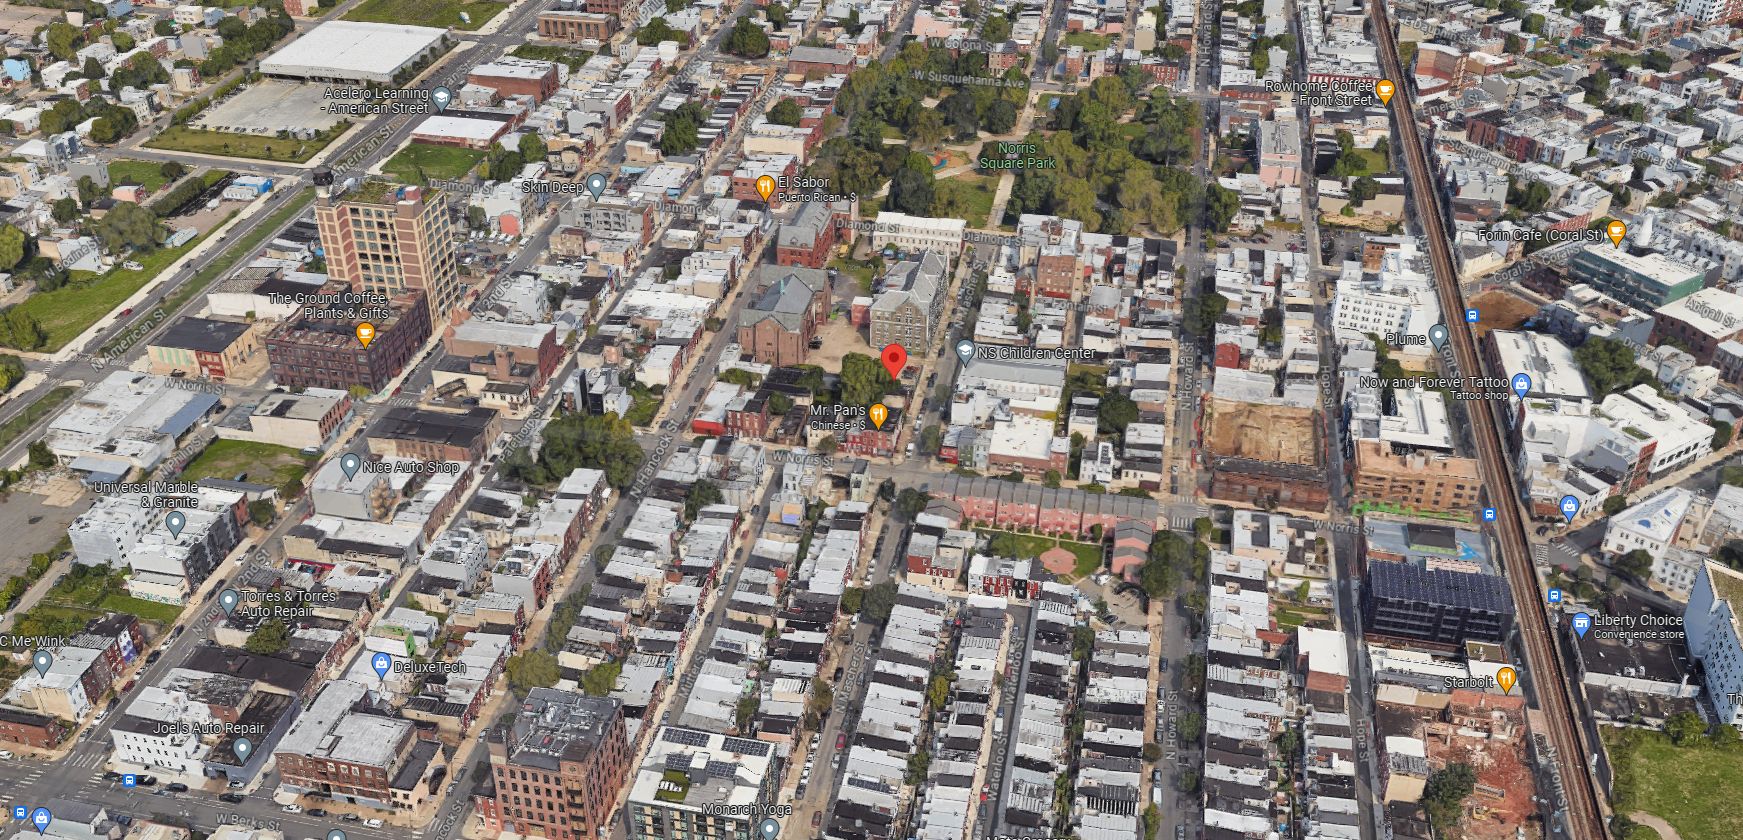 2008 North Mascher Street. Aerial view. Looking north. Credit: Google Maps